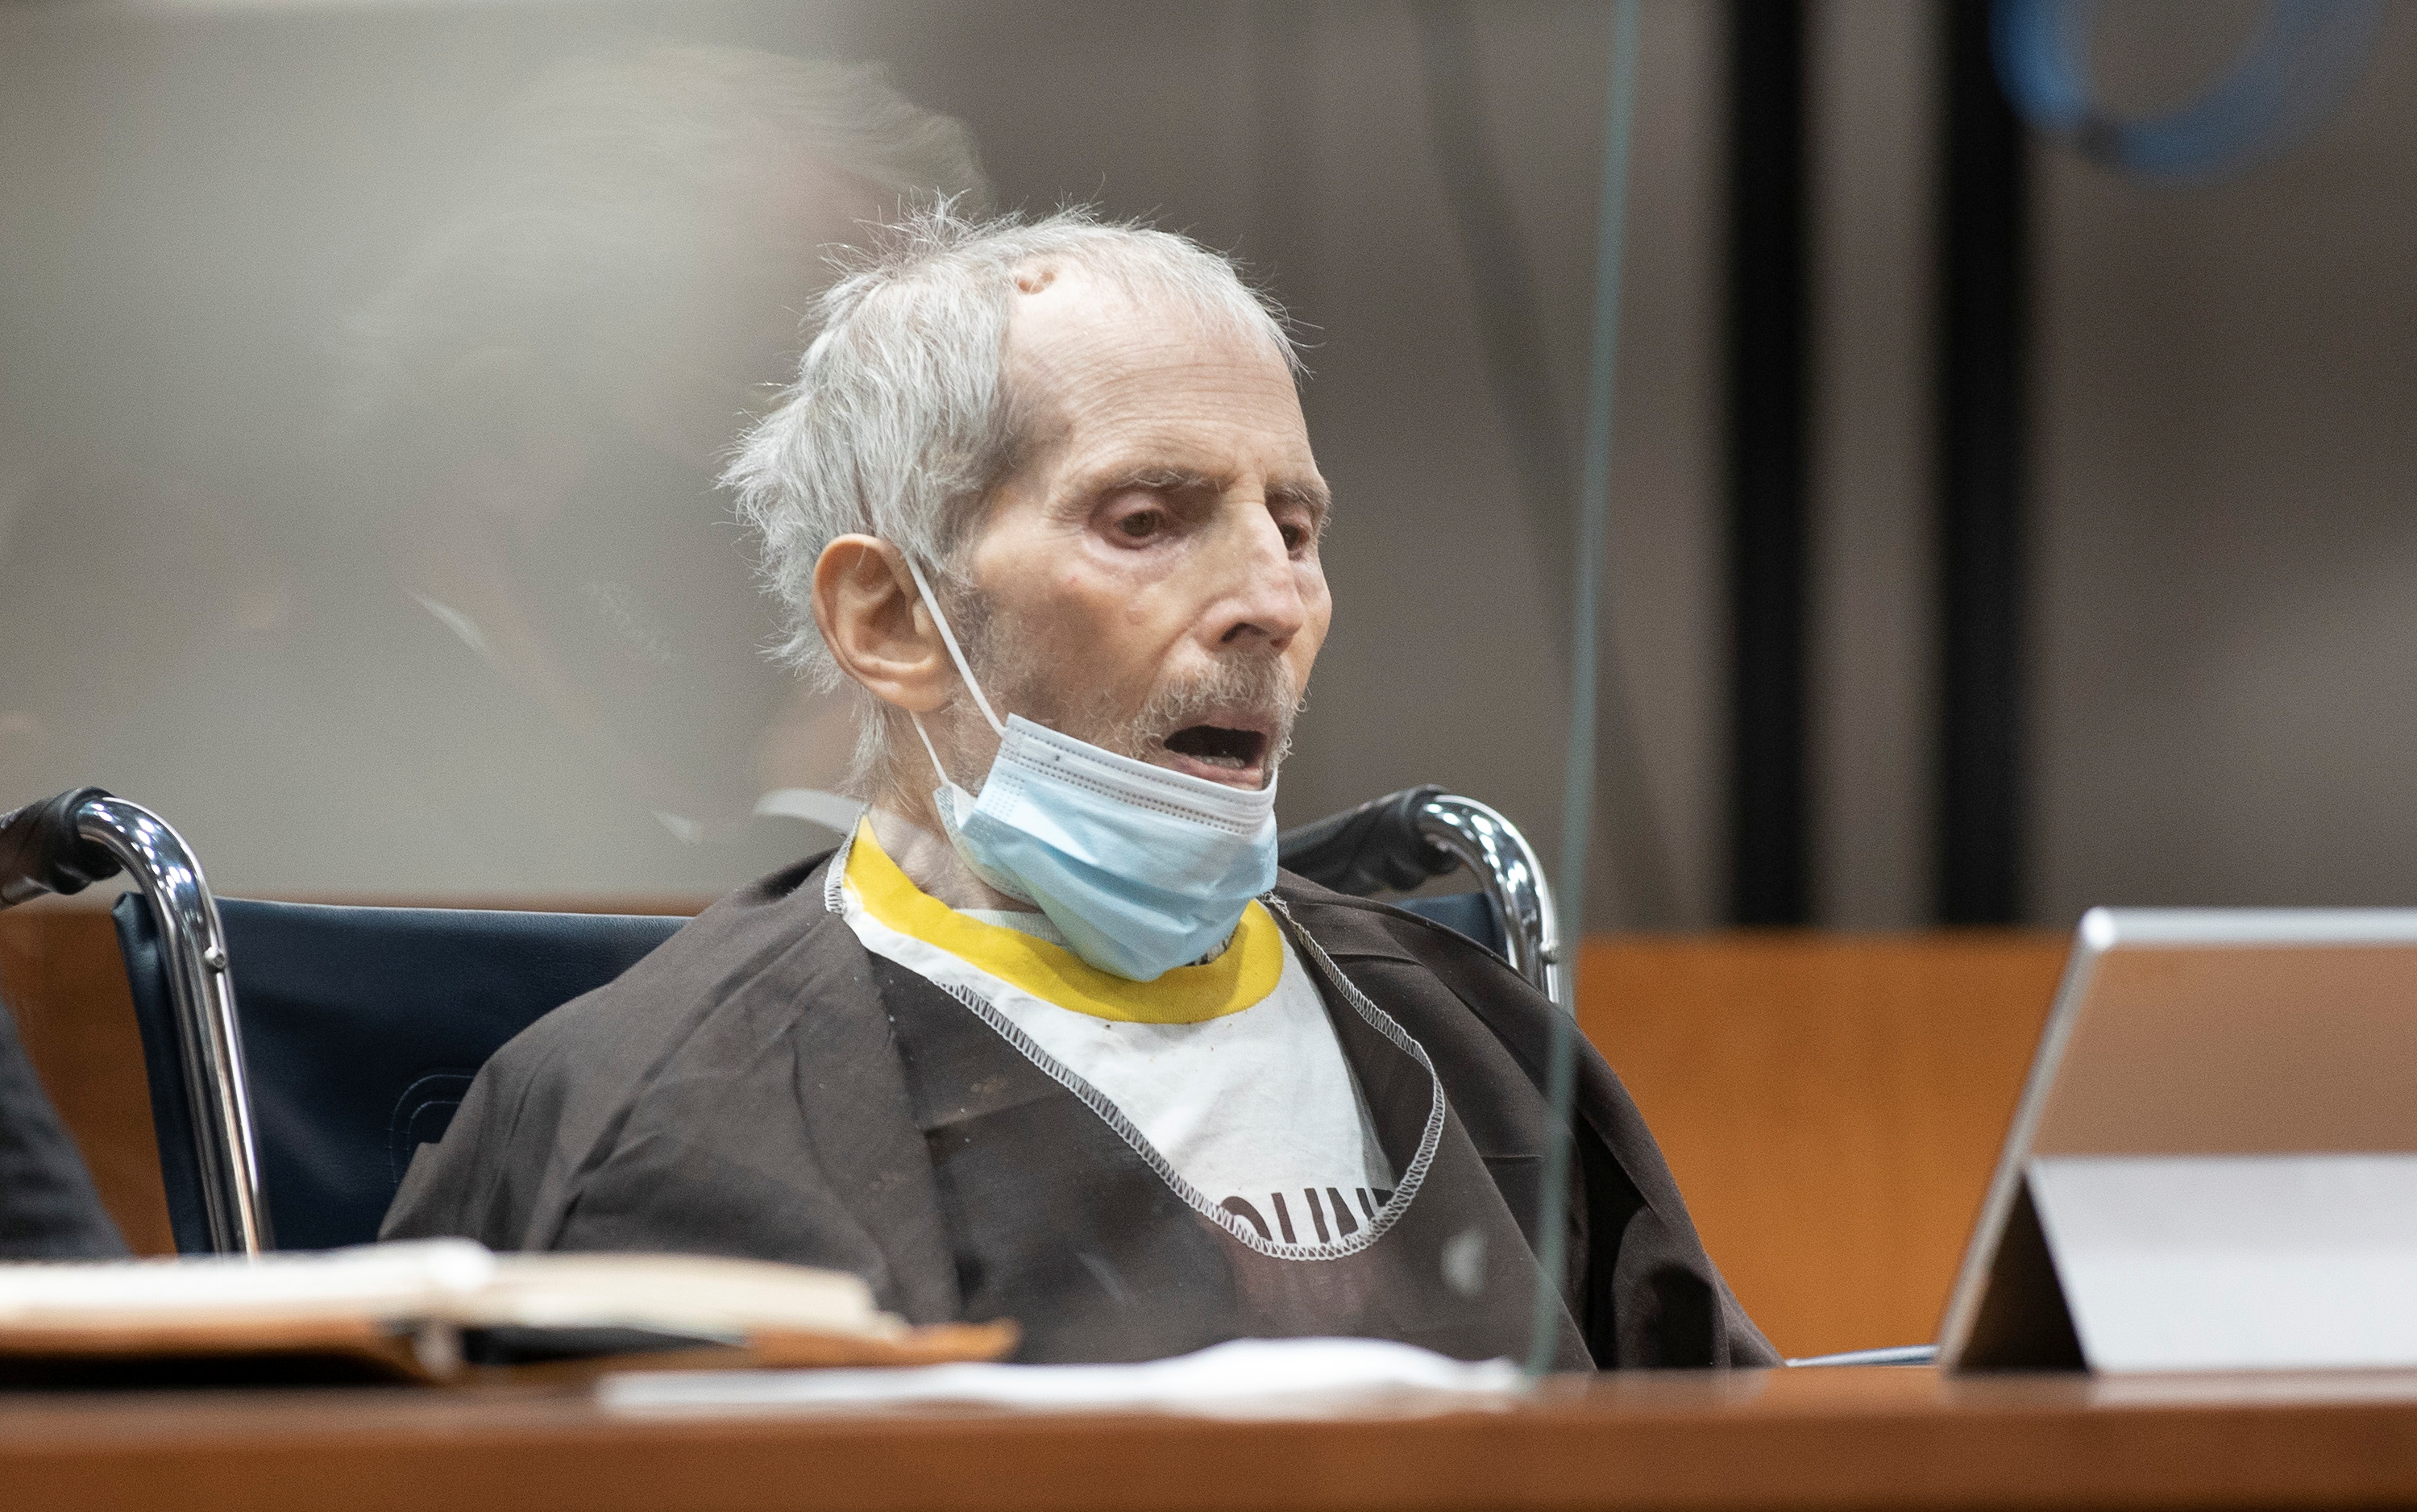 Robert Durst is seen being sentenced to life without possibility of parole for the killing of Susan Berman, in Los Angeles